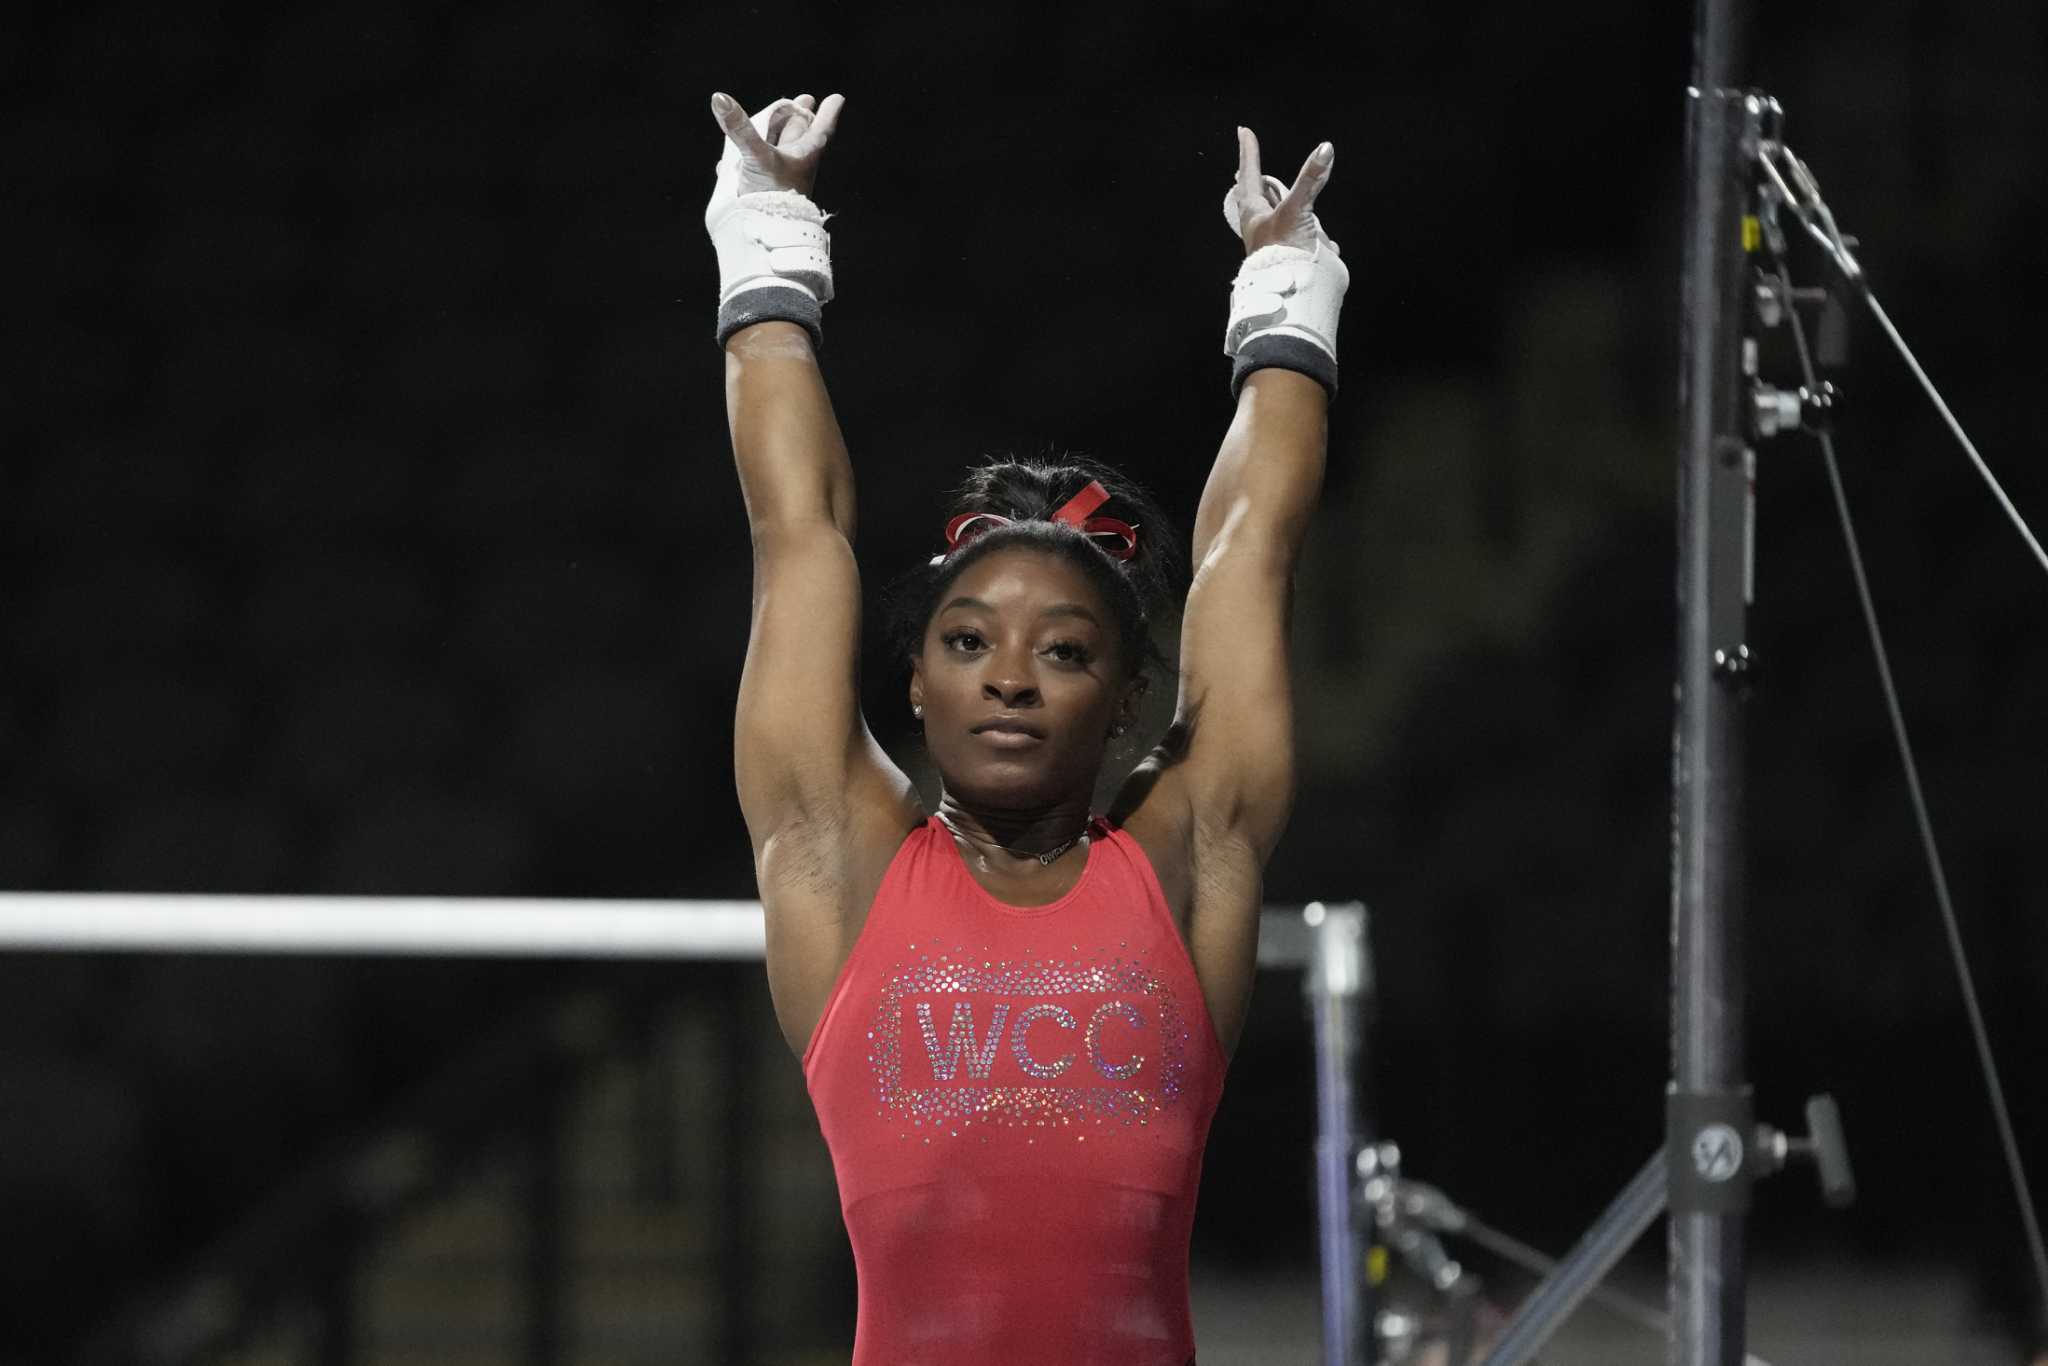 Simone Biles A strong focus on return to gymnastics competition